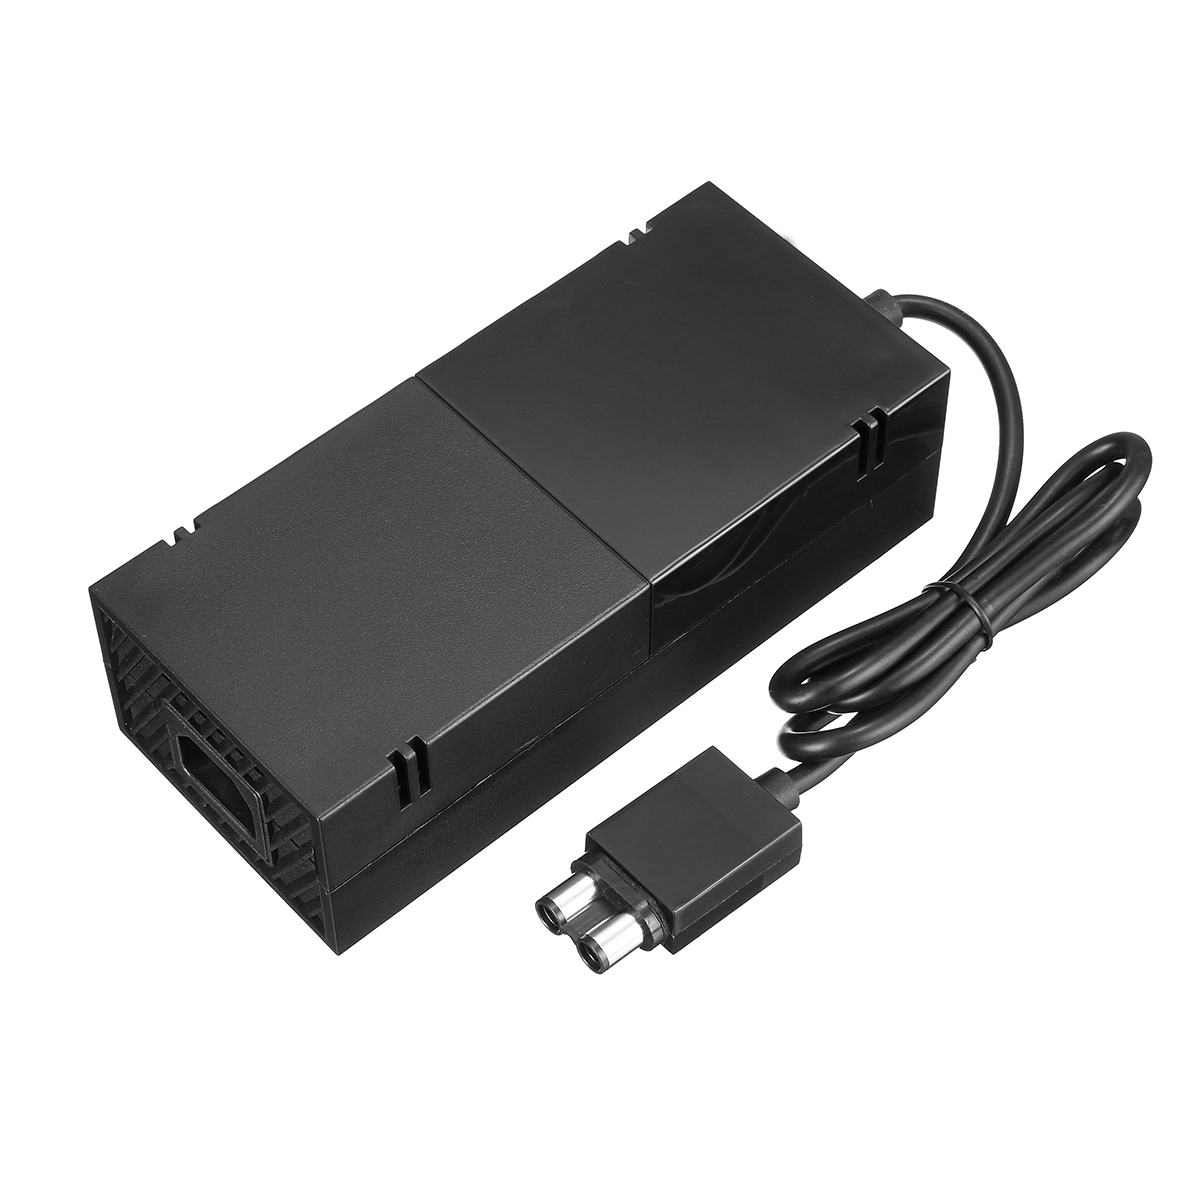 AC Adapter Charger Power Supply Cord Cable Unit for Microsoft Xbox One Console 20